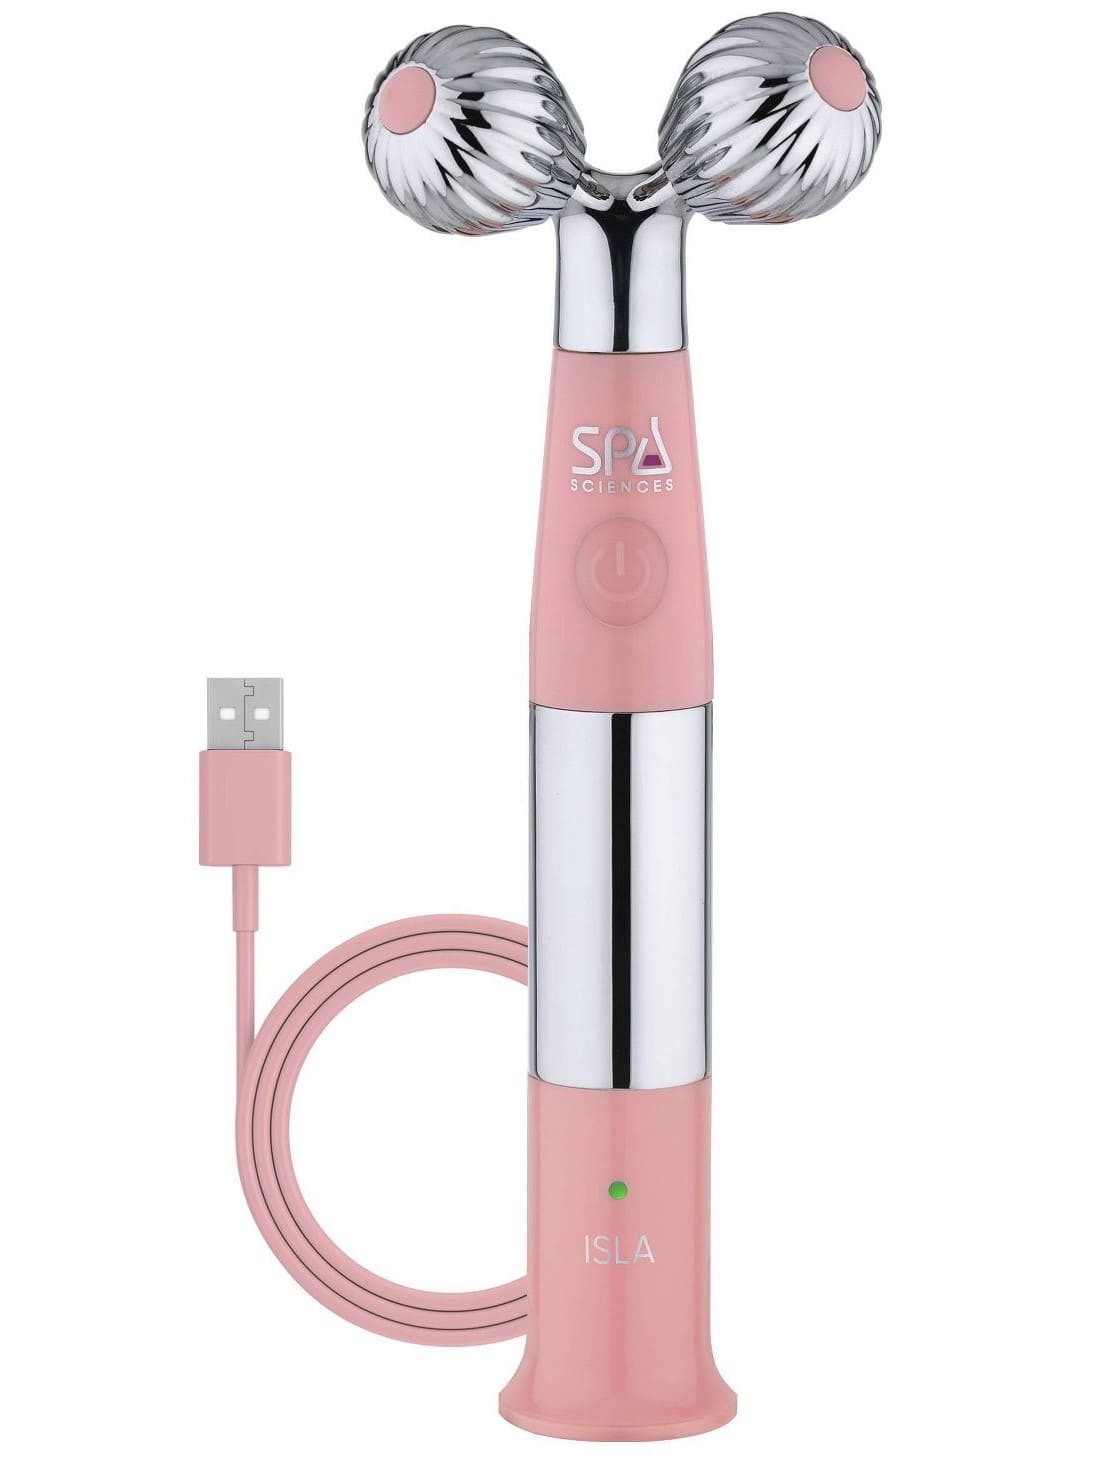 Spa Sciences Sonic Ice and Heat Roller